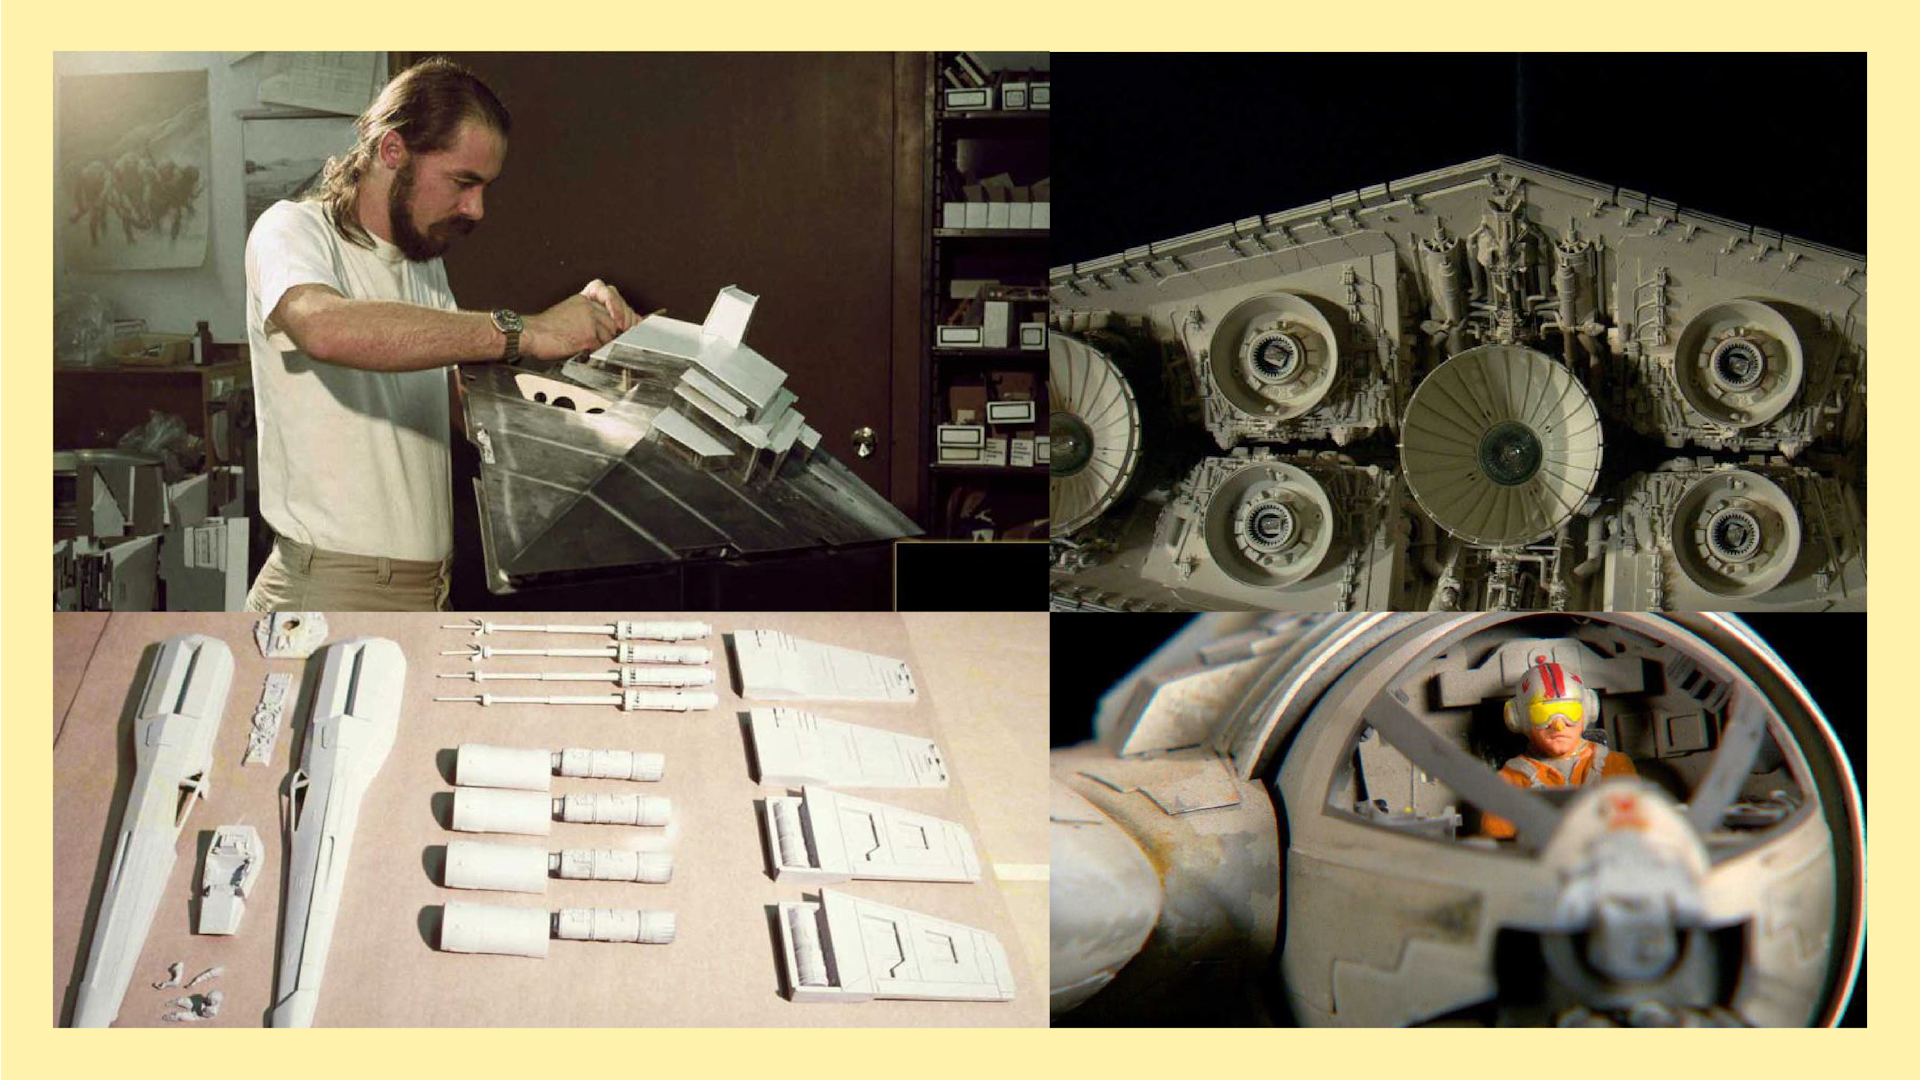 On set of Star Wars in the 70s, a SFX specialist constructs a miniature spaceship